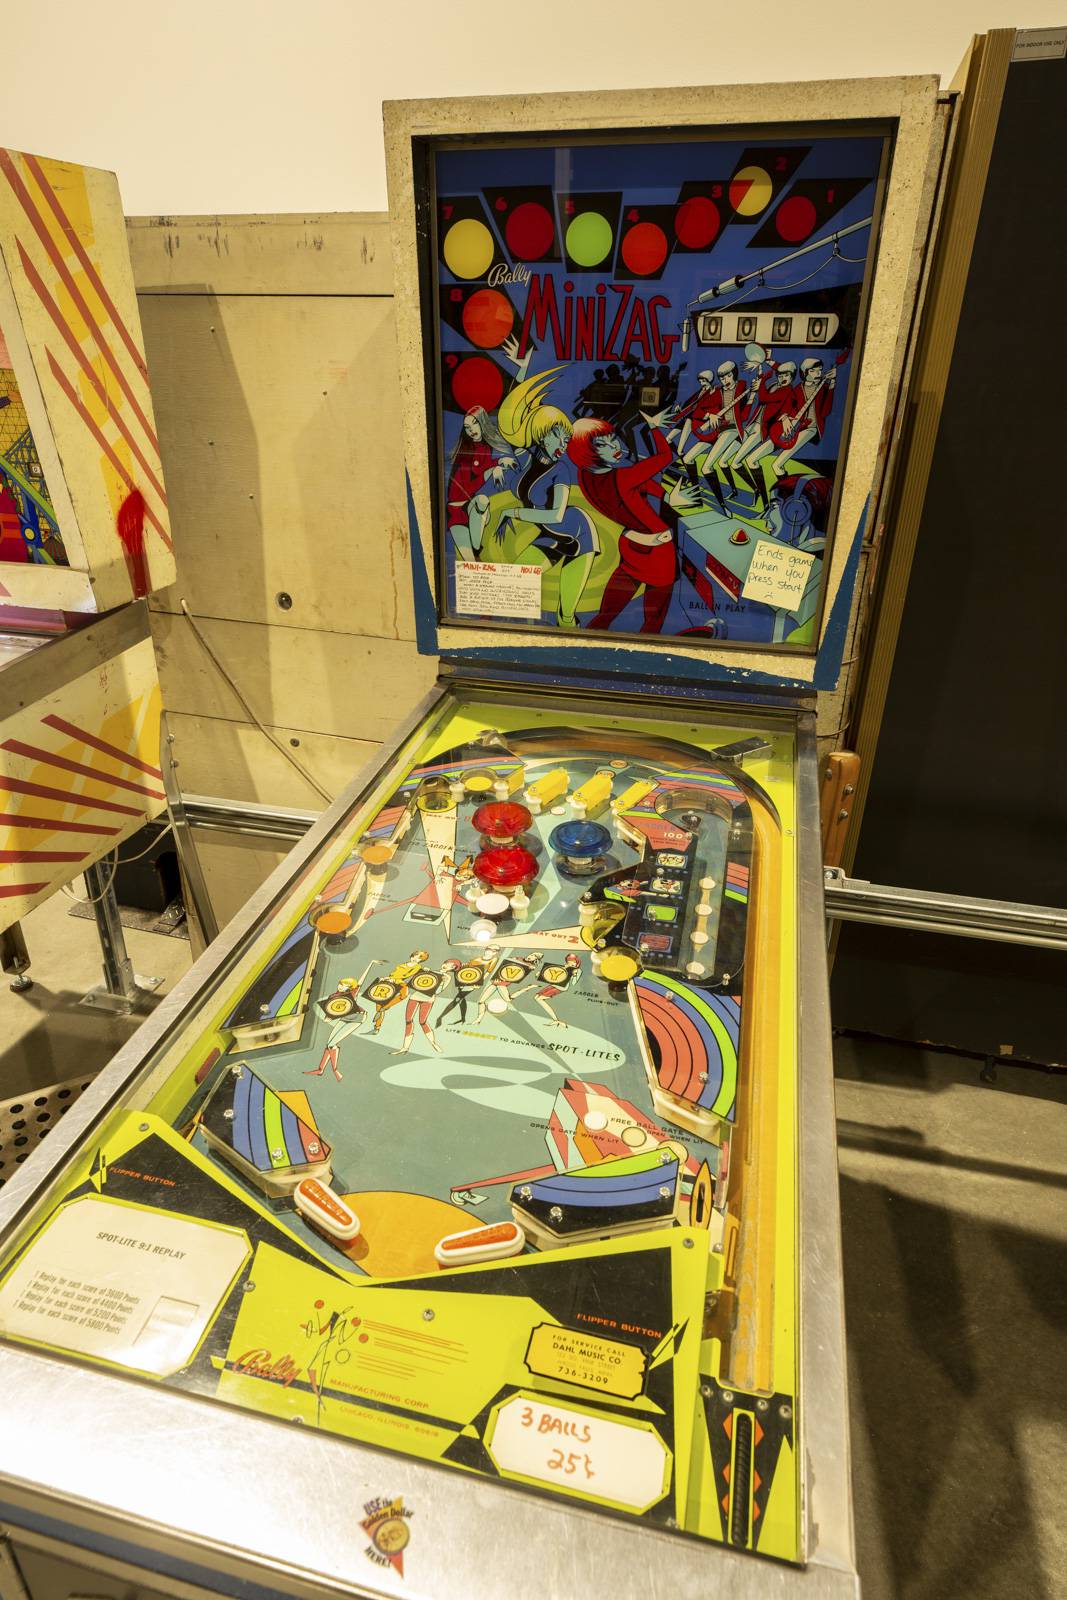 New Strip Location of Pinball Hall of Fame in Jeopardy Due to Pandemic